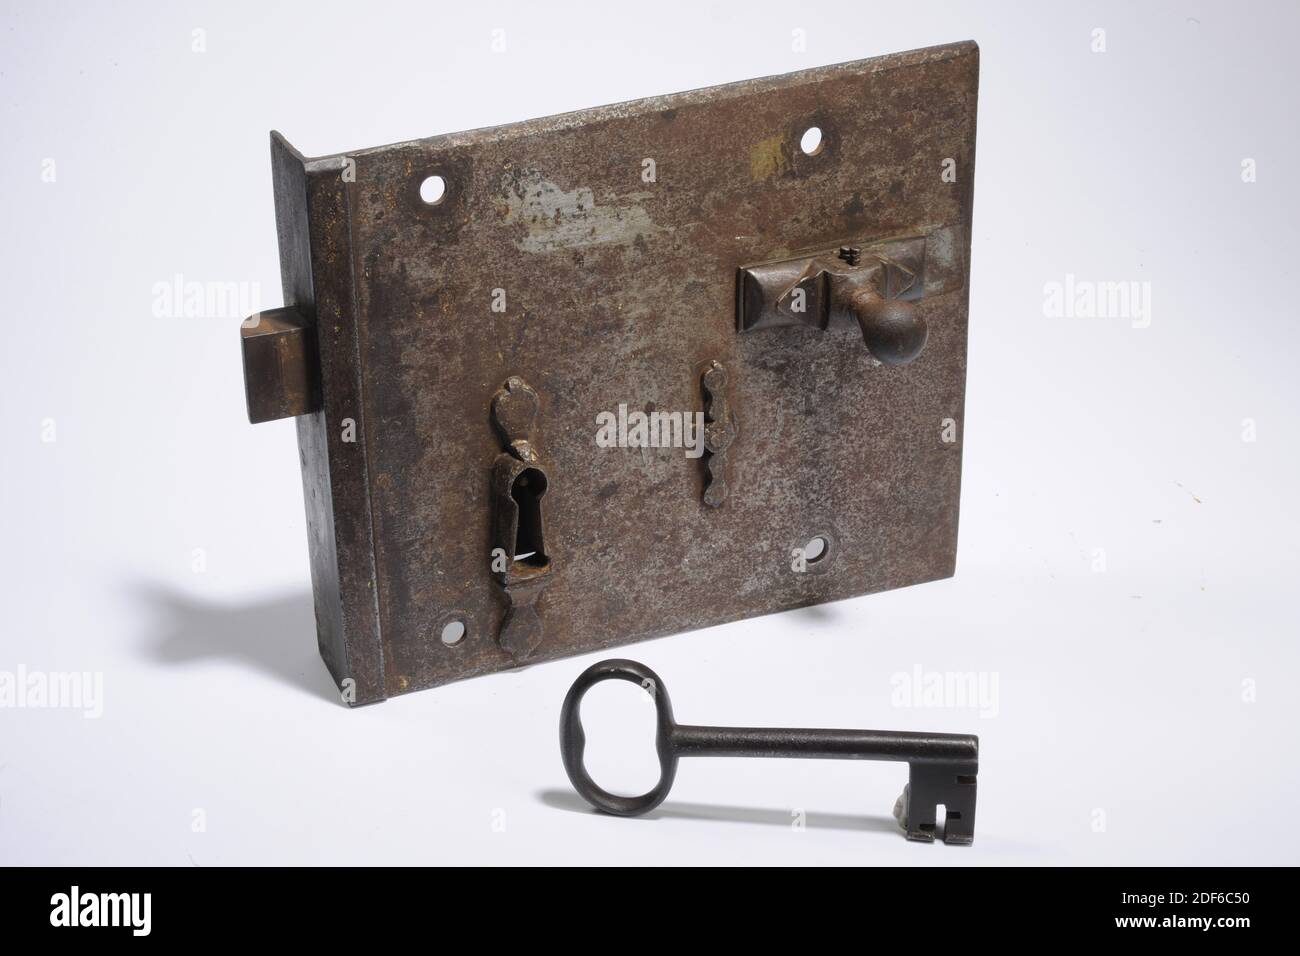 Anonymous, 16th century, Lock: 22.7 x 29.7 x 5.4cm (227 x 297 x 54mm), Key: 7 x 15.2 x 1.2cm (70 x 152 x 12mm), Iron lock with key attributed to the house of PA Van der Werf. The lock consists of an iron plate with a keyhole and a slide with a button. The plate has a perpendicular part with a square opening for the bolt. The keyhole has a leaf-shaped decoration on the top and bottom. The actual lock with tumbler mechanism is riveted to this plate. A simple baluster-shaped decoration has been placed on the place of the rivets. There are four holes in the plate for attachment to the door. The Stock Photo